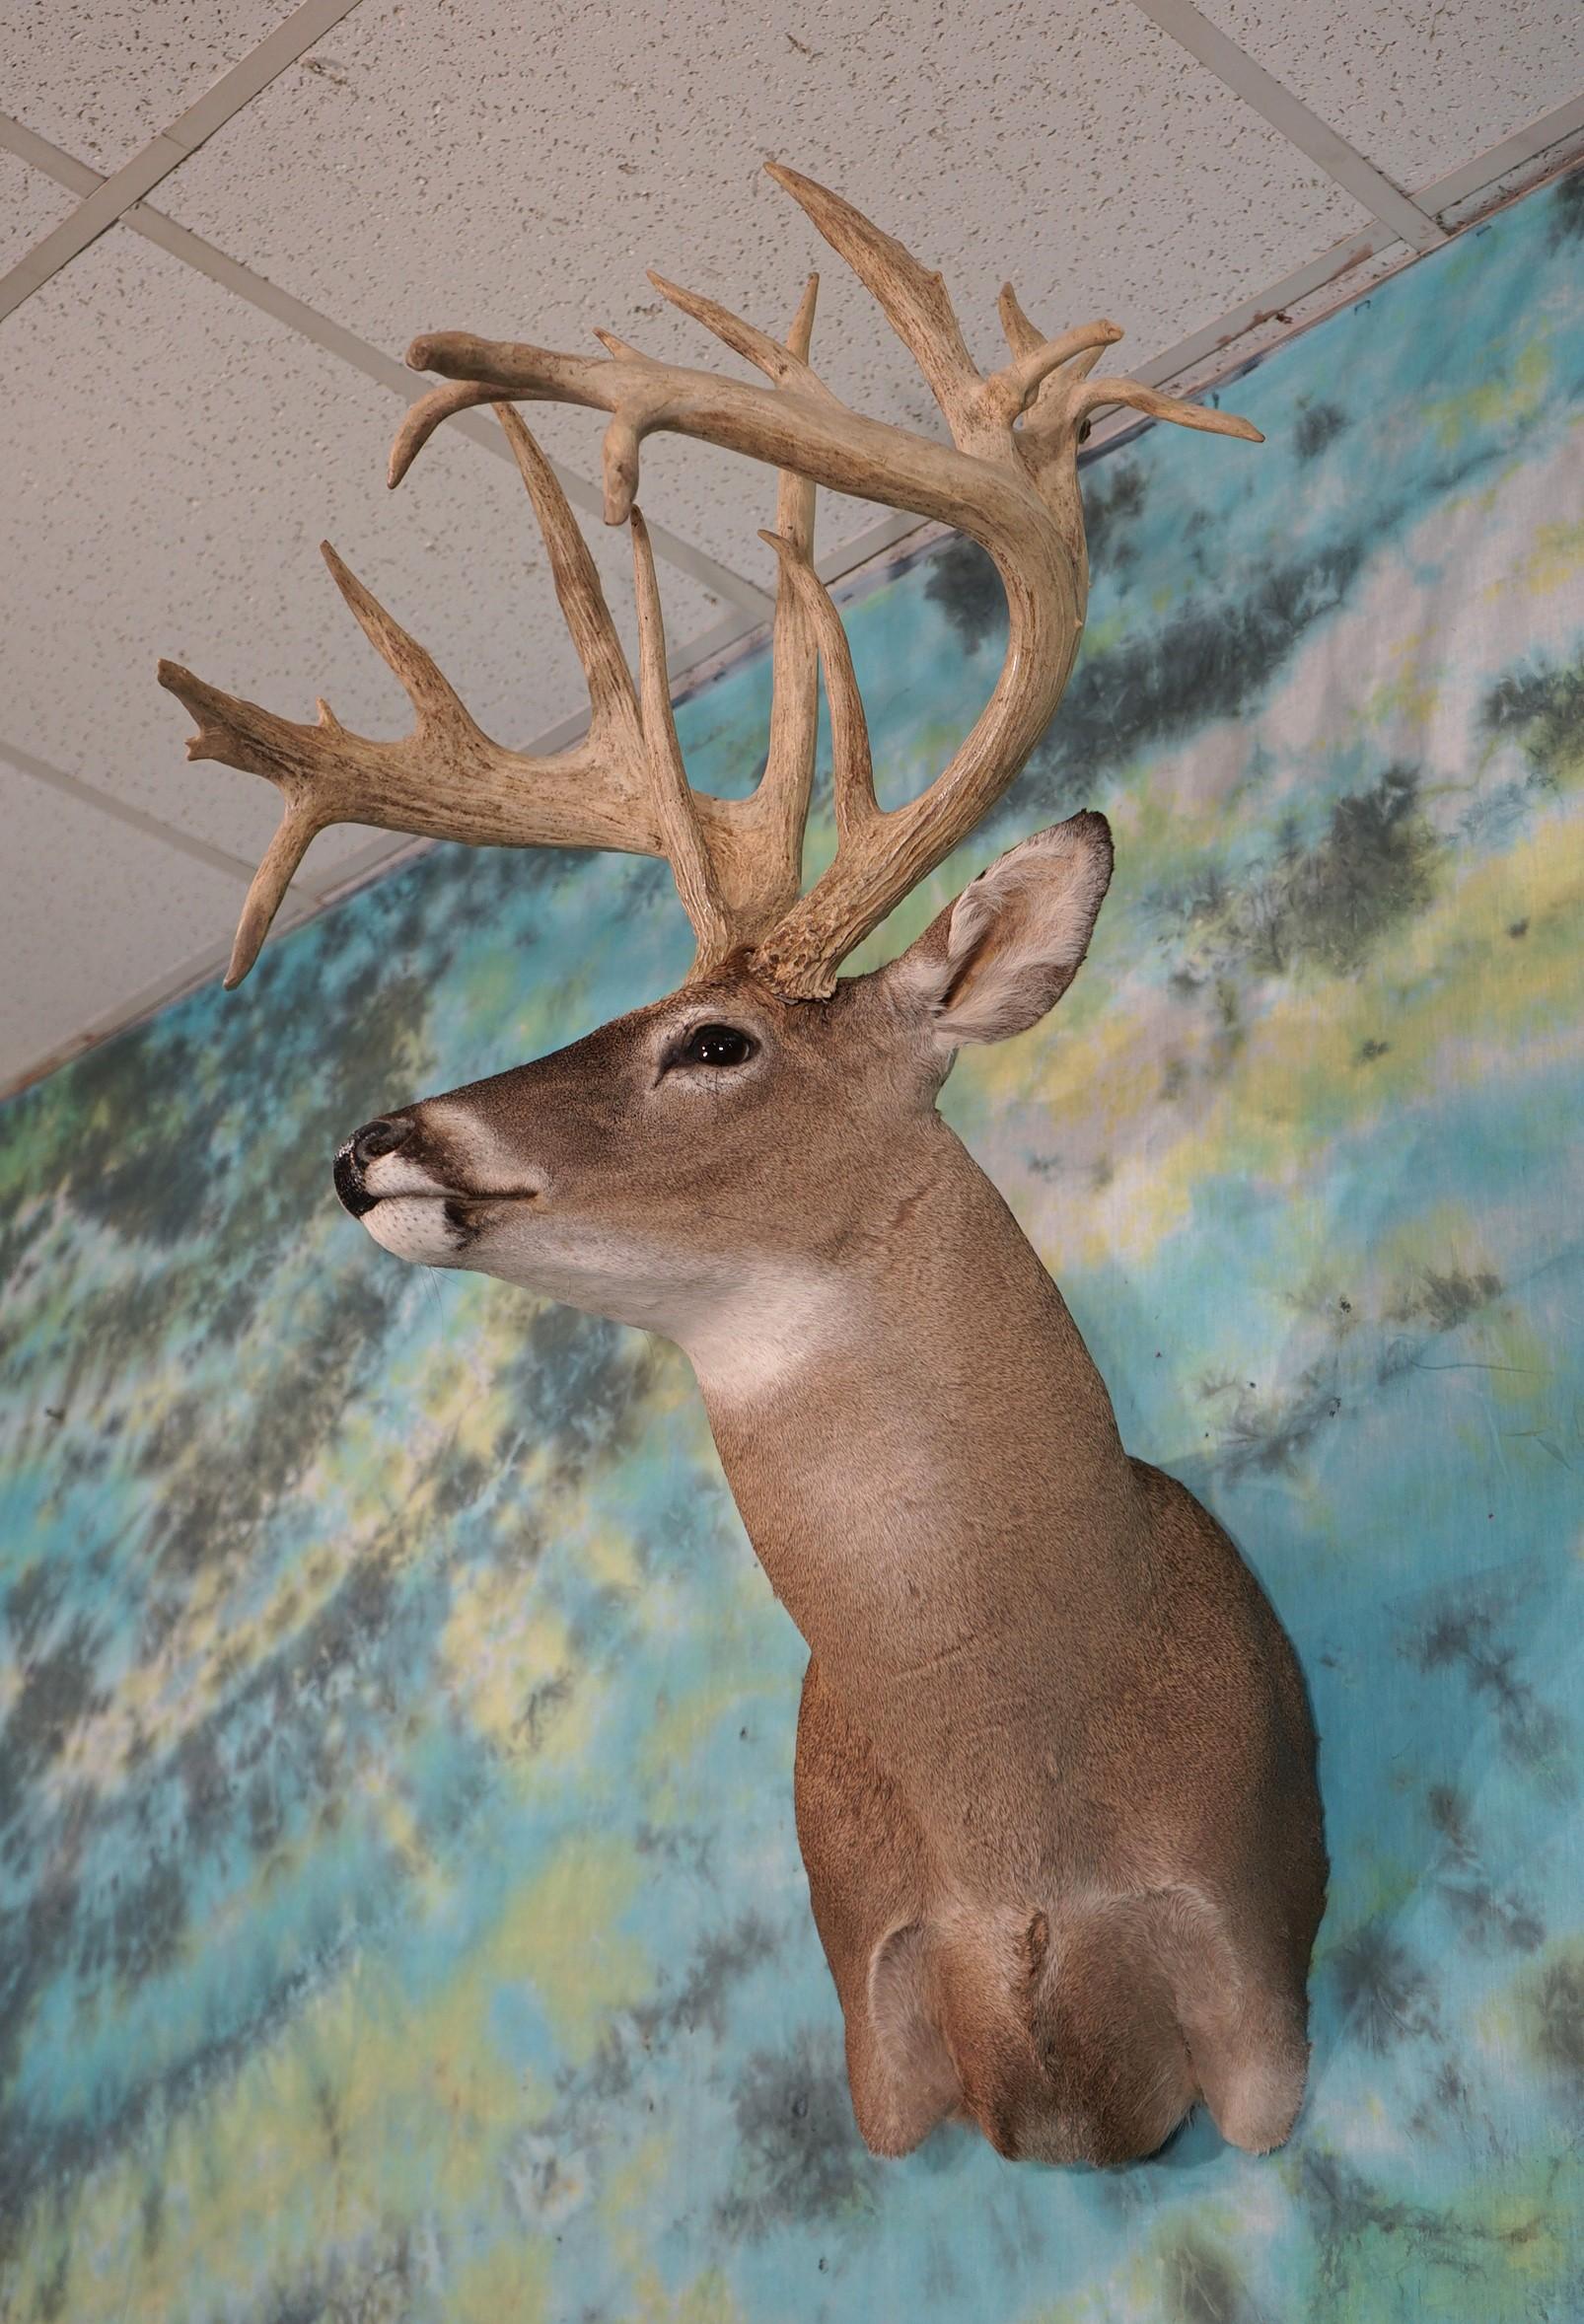 Double Droptine 220 gross 22pts. Whitetail Deer Mounted Shed Buck Shoulder Taxidermy Mount